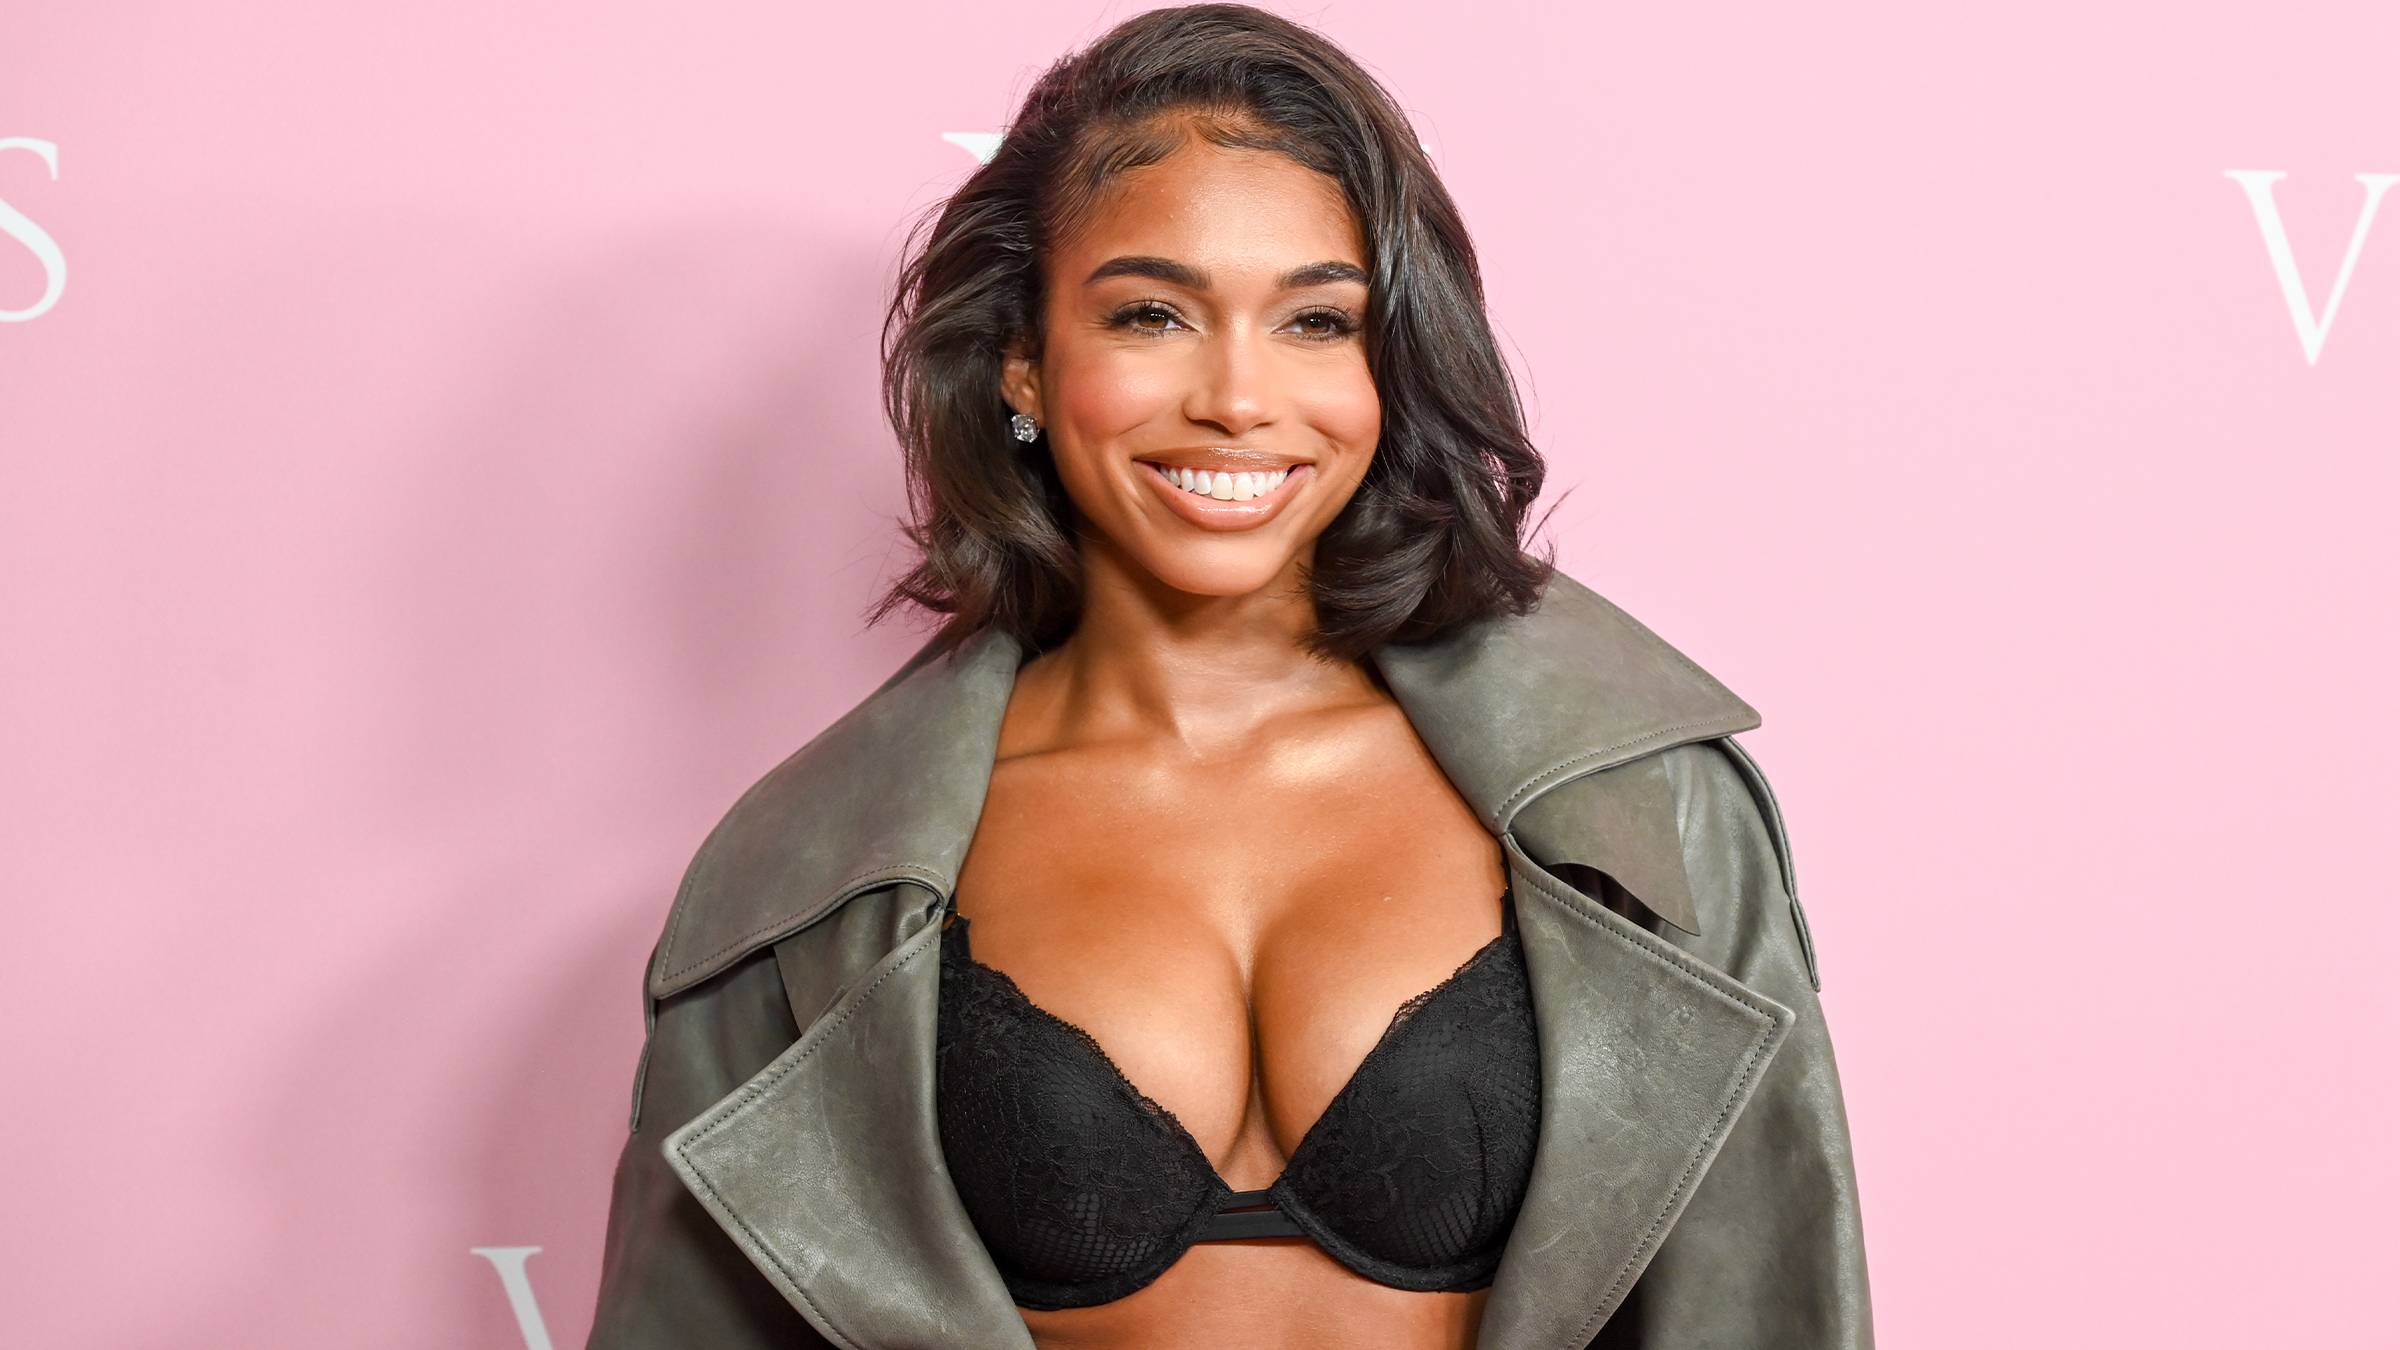 Lori Harvey's Sequin Bralette at the Chanel Cruise Show 2023